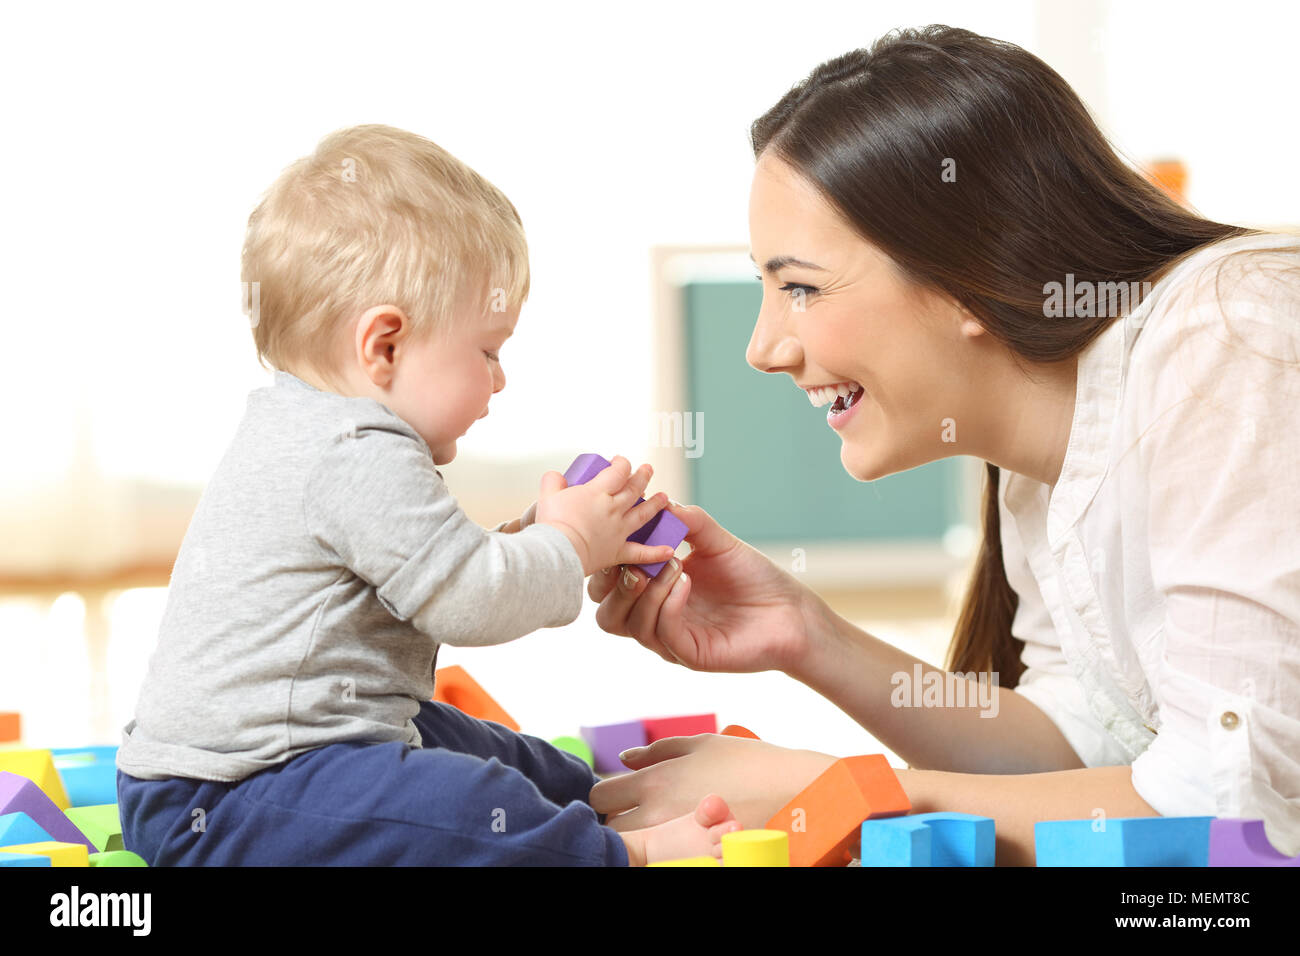 Side view of a happy mother and son playing with toys on the floor Stock Photo